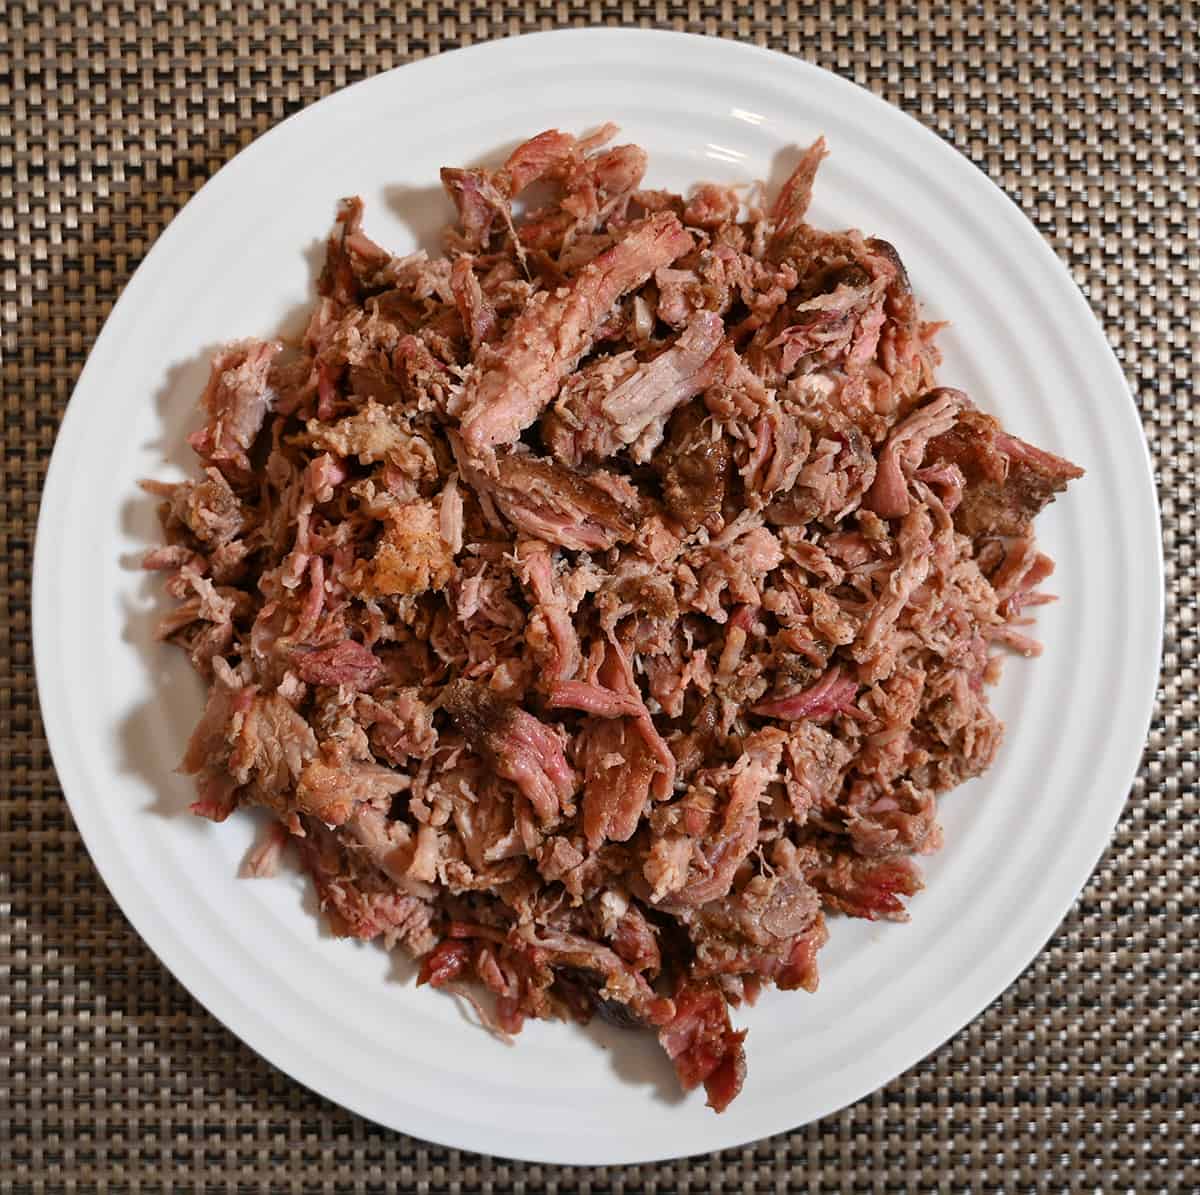 Top down image of the cooked pulled pork served on a white plate.